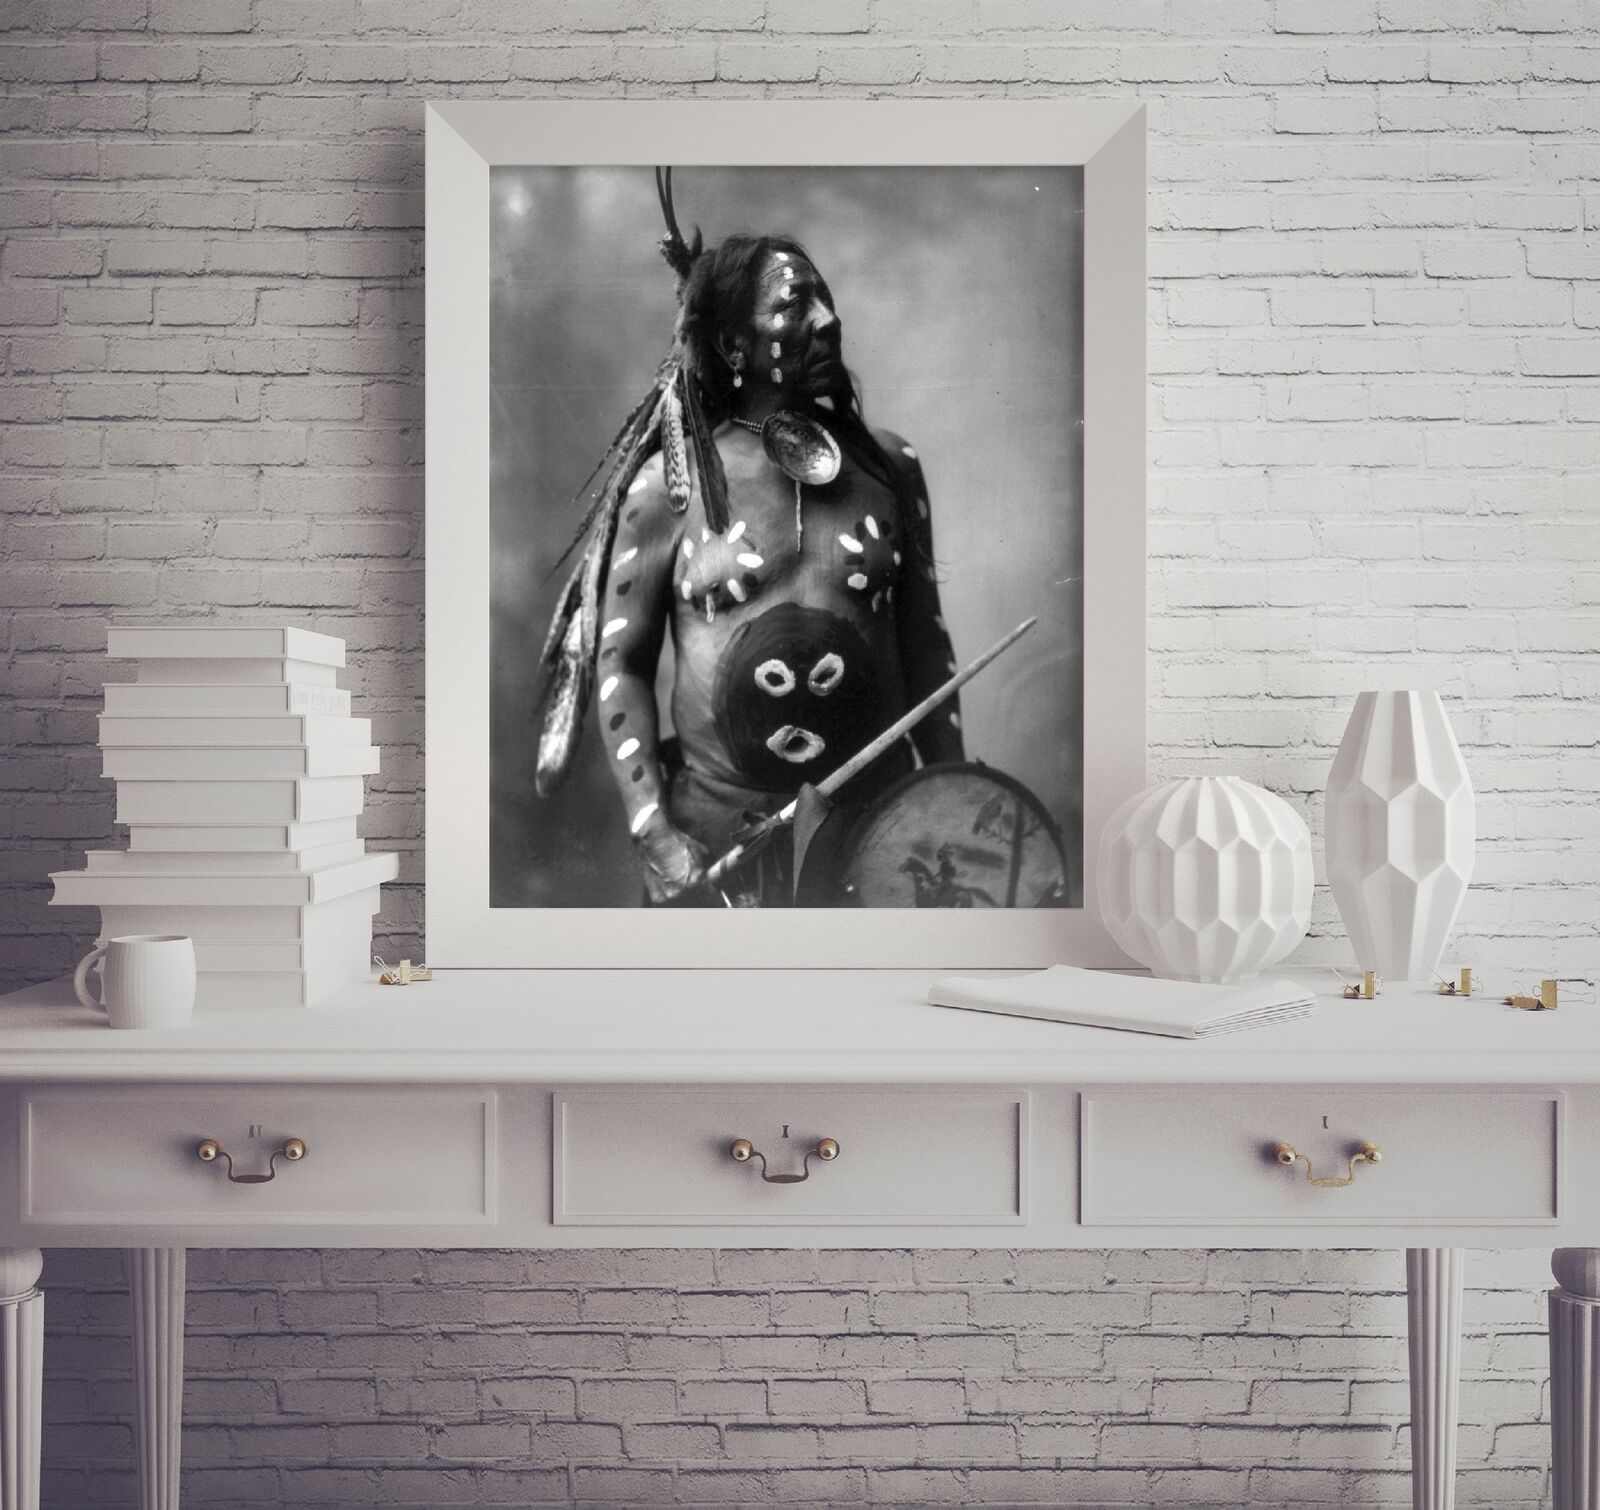 Photo: Last Horse, Sioux Indian, Painted, spear, shield, c1899